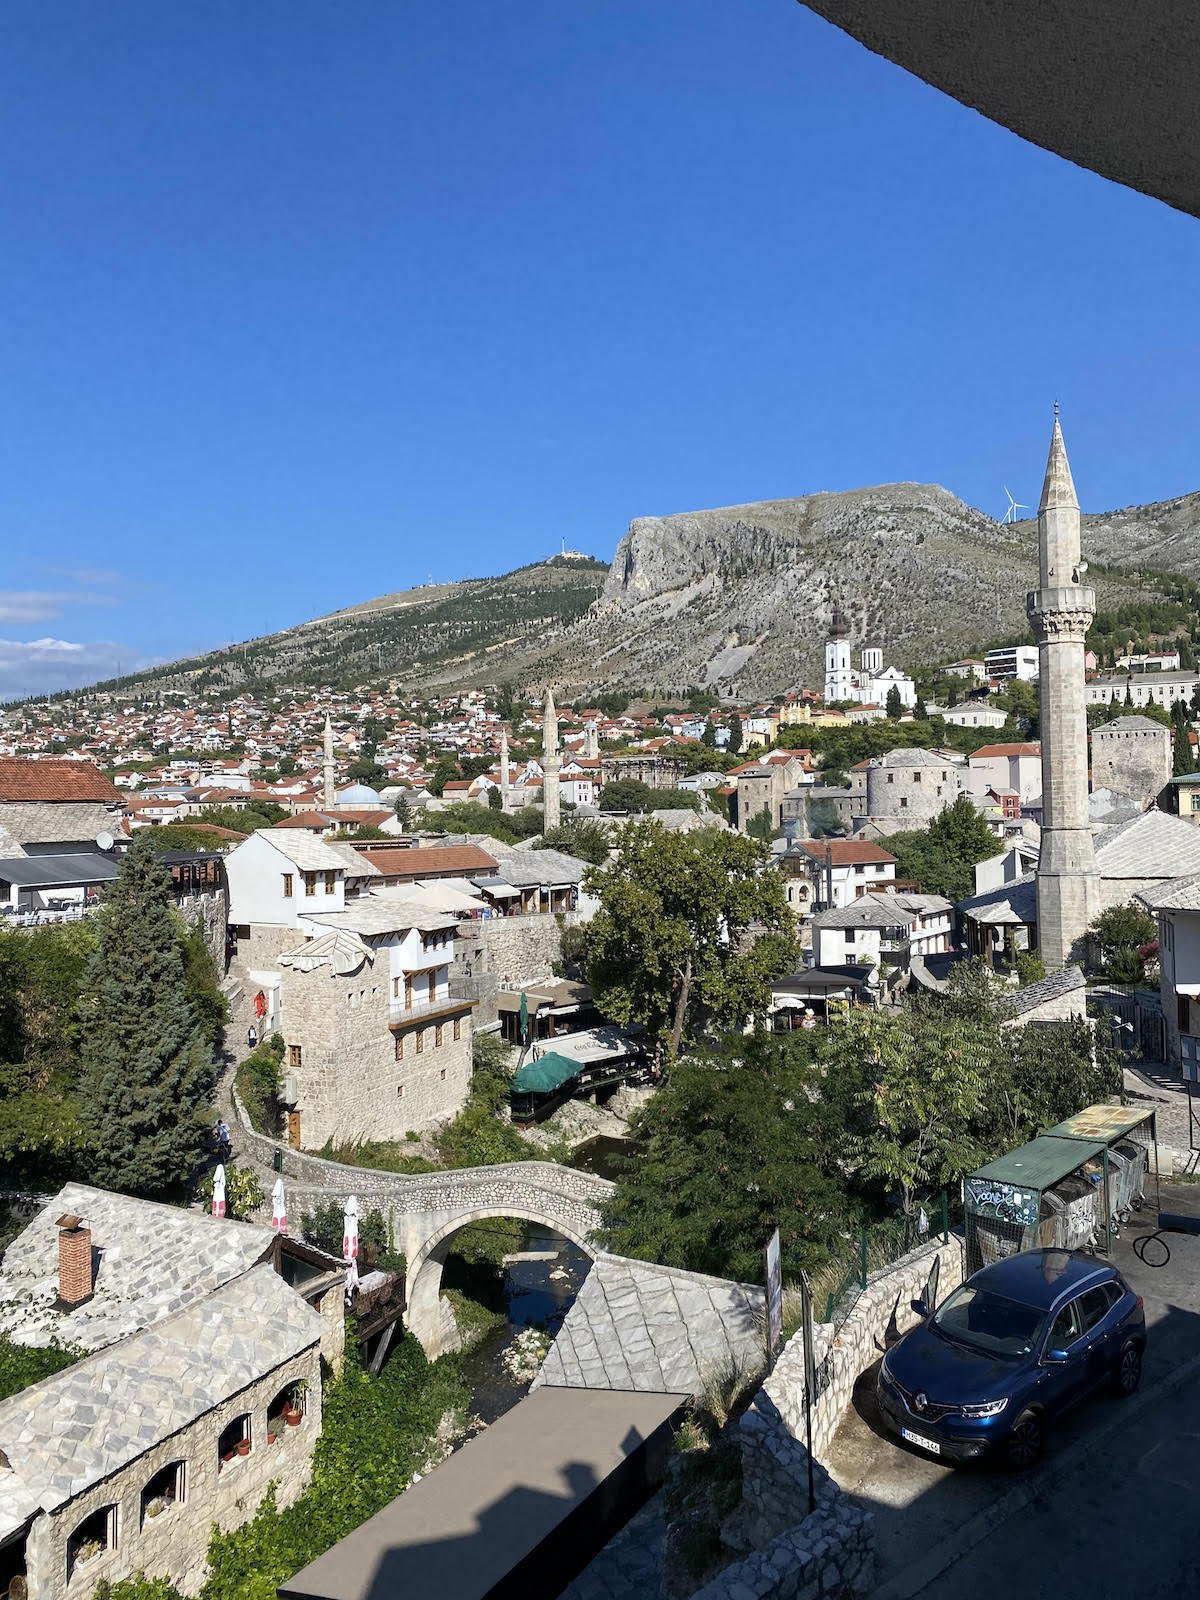 A breathtaking cityscape seen from a balcony, offering picturesque views during day trips from Dubrovnik to Mostar.